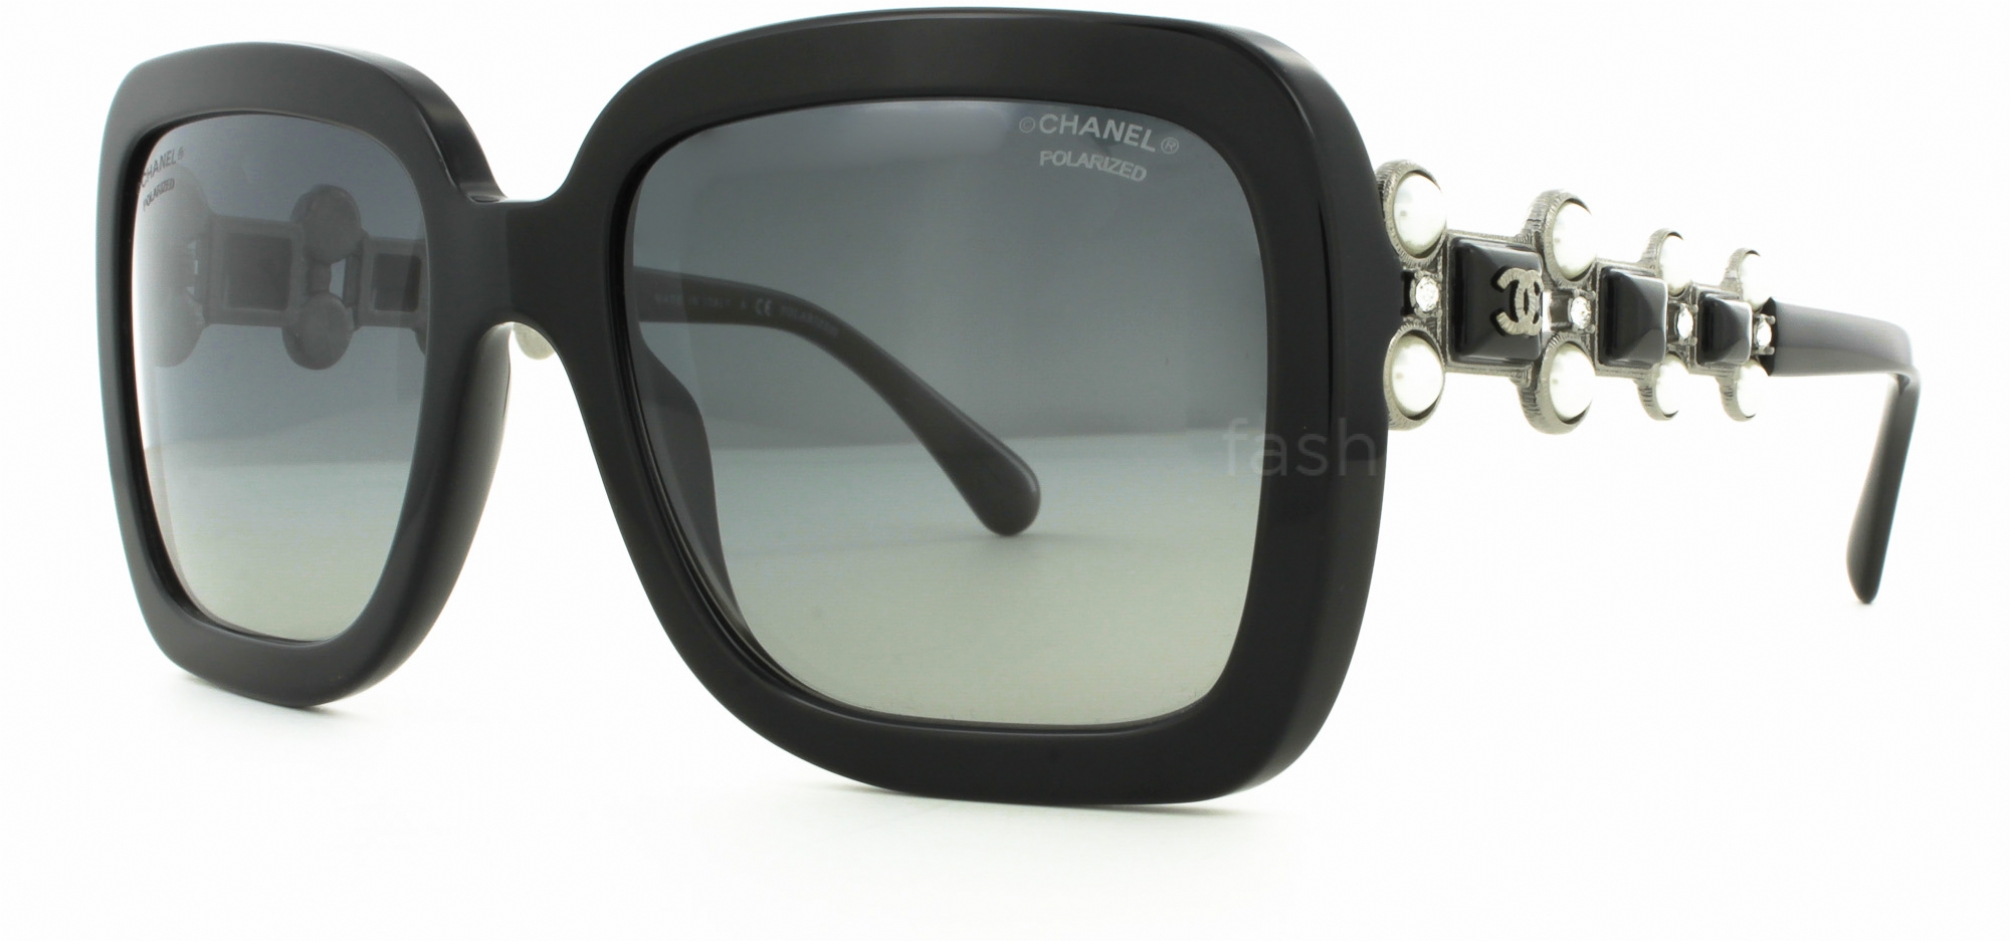 Chanel 5428-H-A Pearl Sunglasses Black Frame Used with Case from